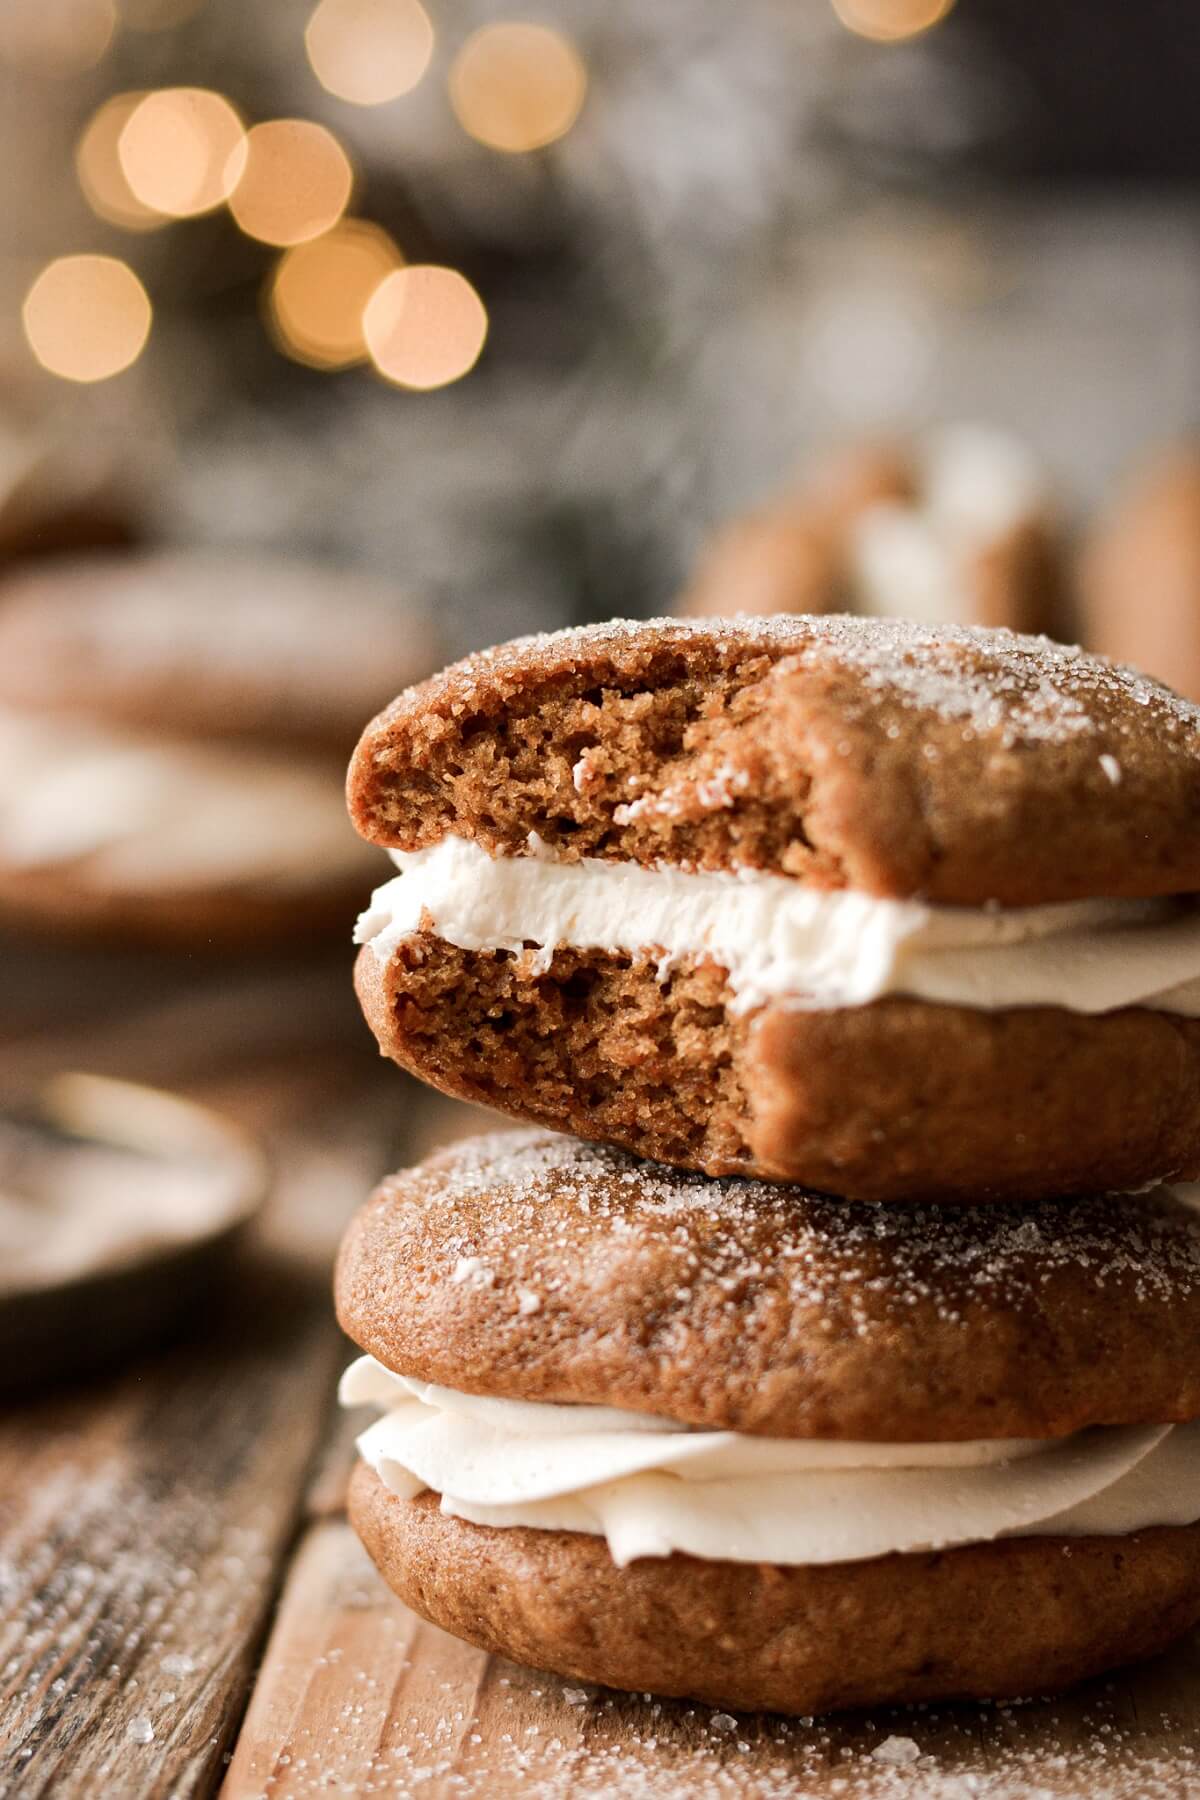 Gingerbread whoopie pie with a bite taken.